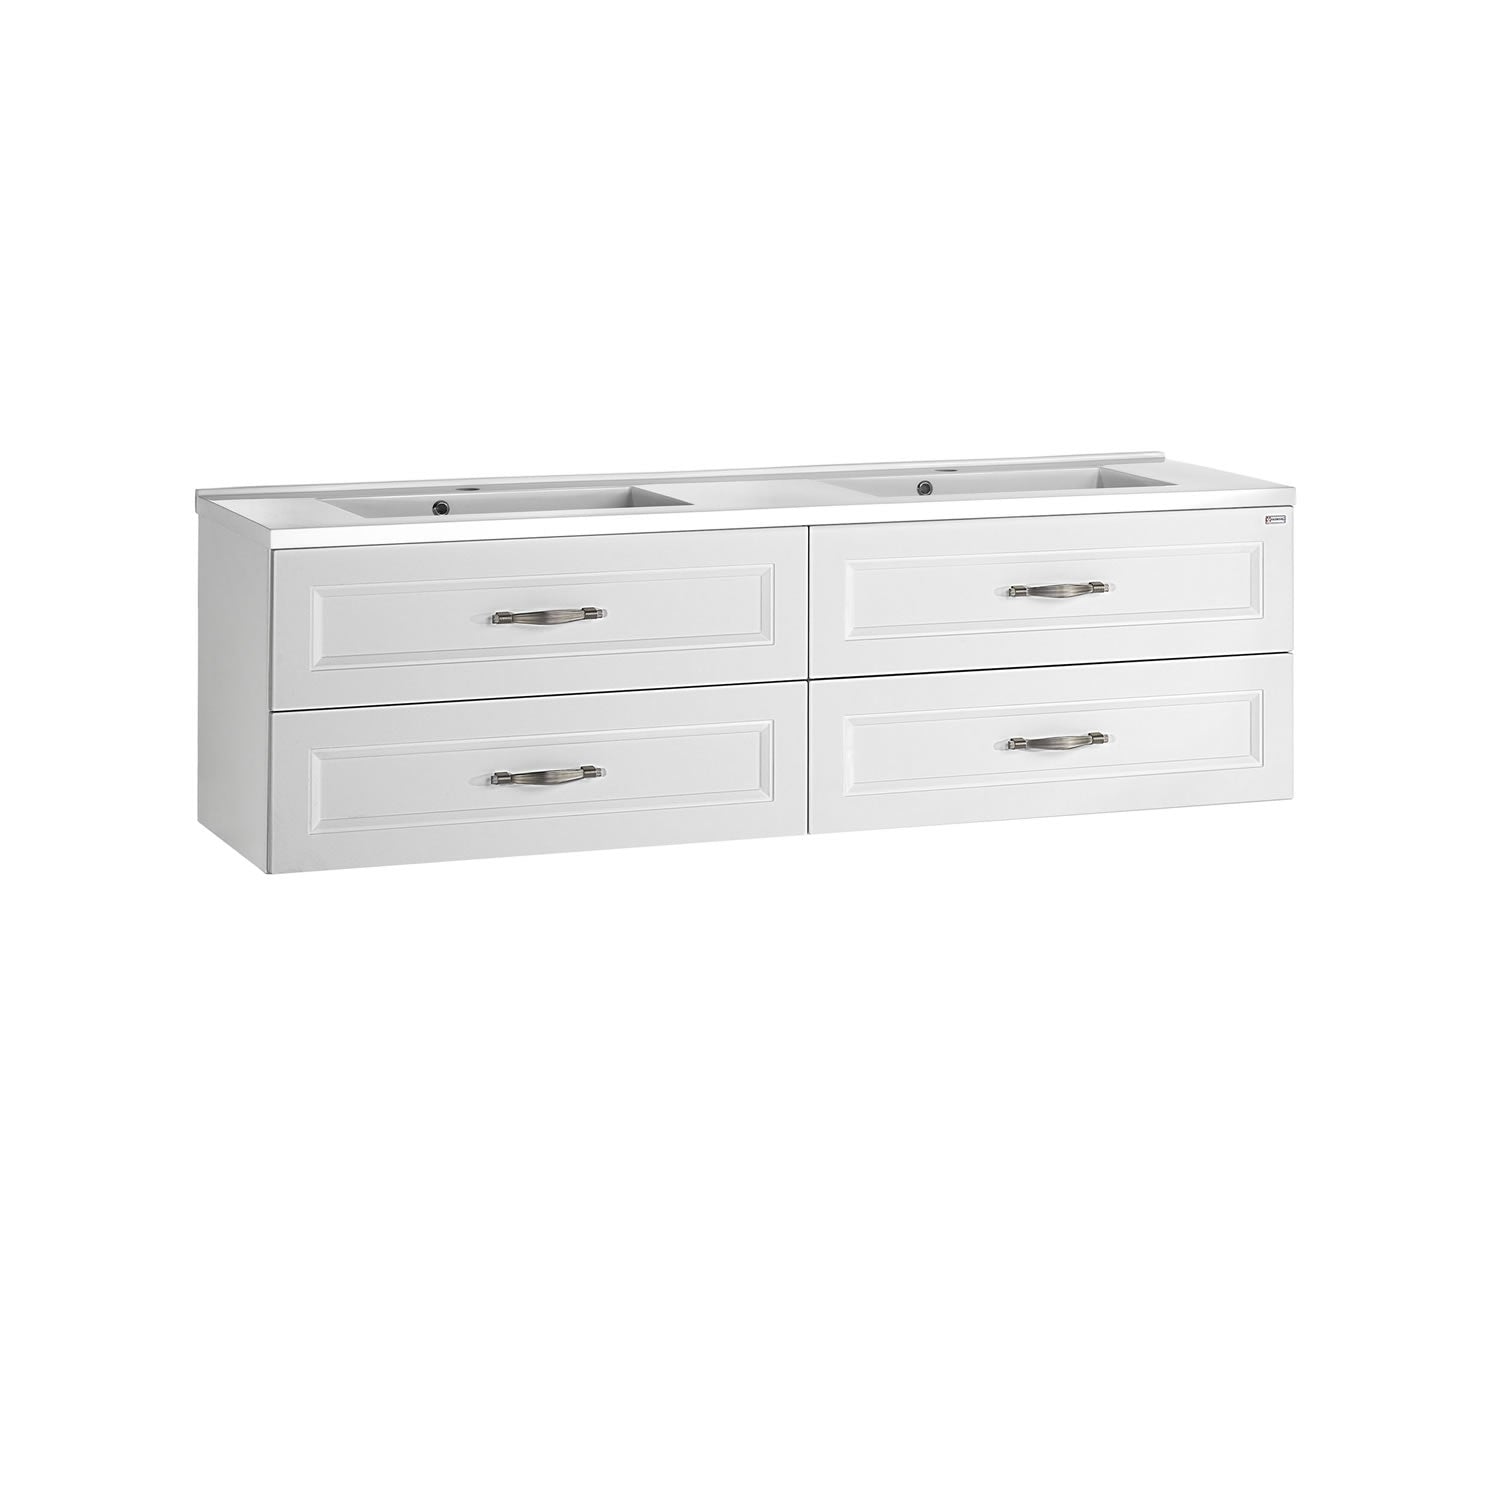 48" Double Vanity, Wall Mount, 4 Drawers with Soft Close, White, Serie Class by VALENZUELA